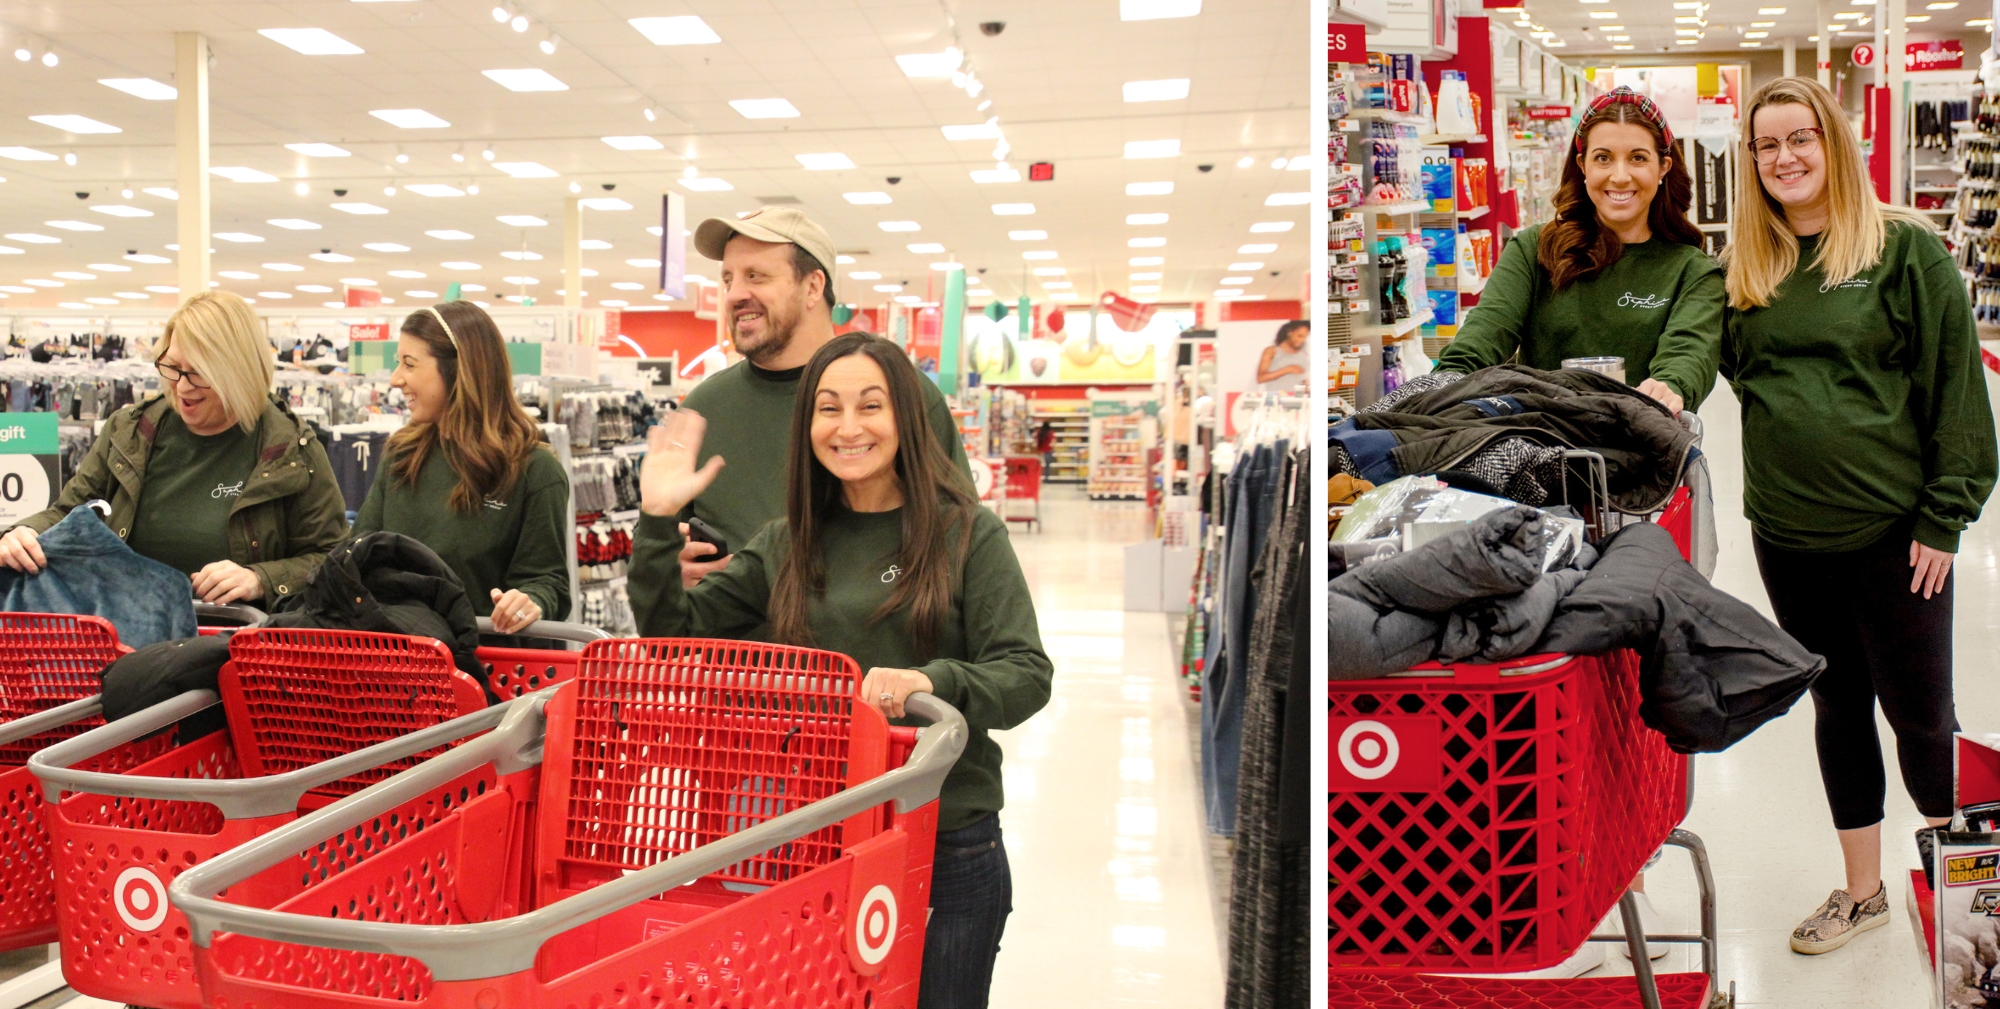 Saphire Event Group Gives Back Target Shopping